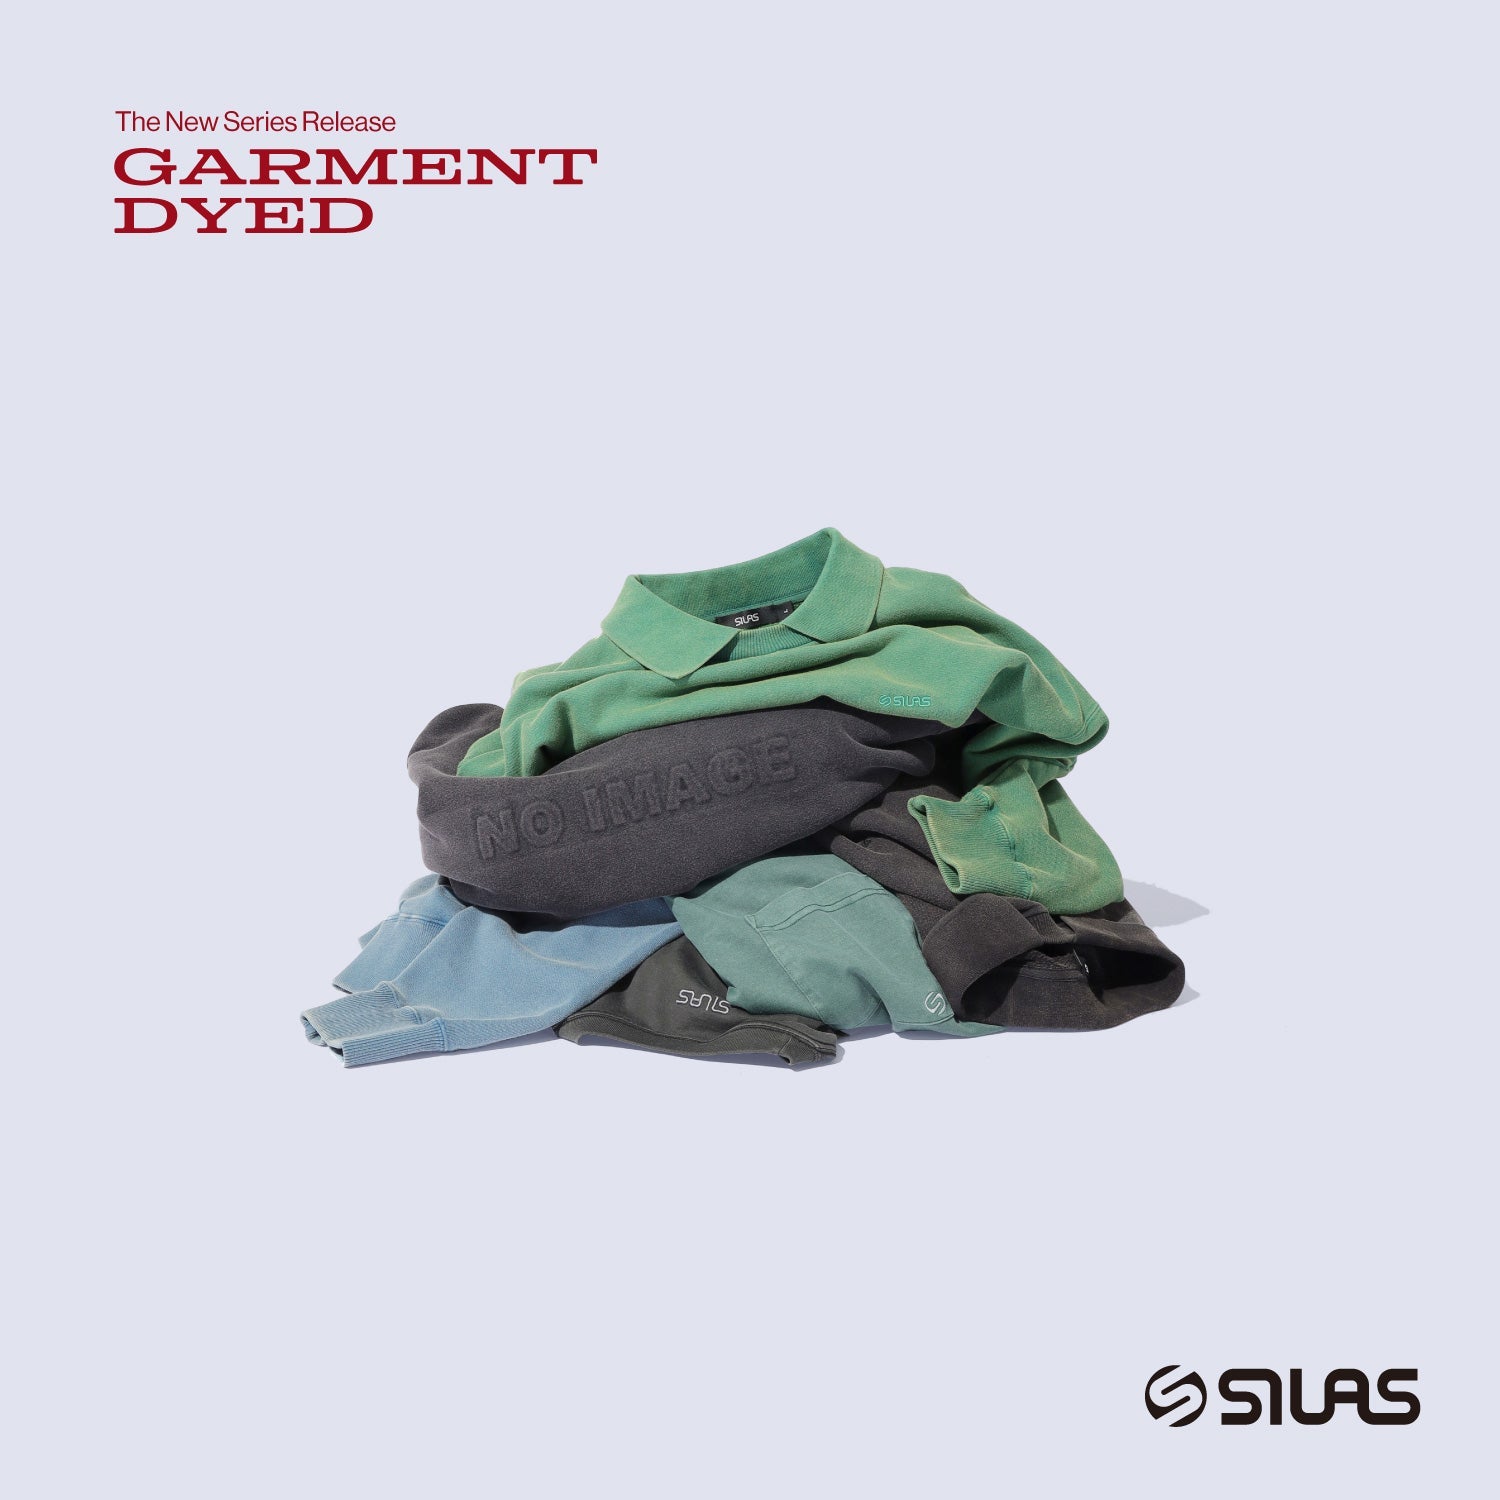 SILAS GARMENT DYED SERIES